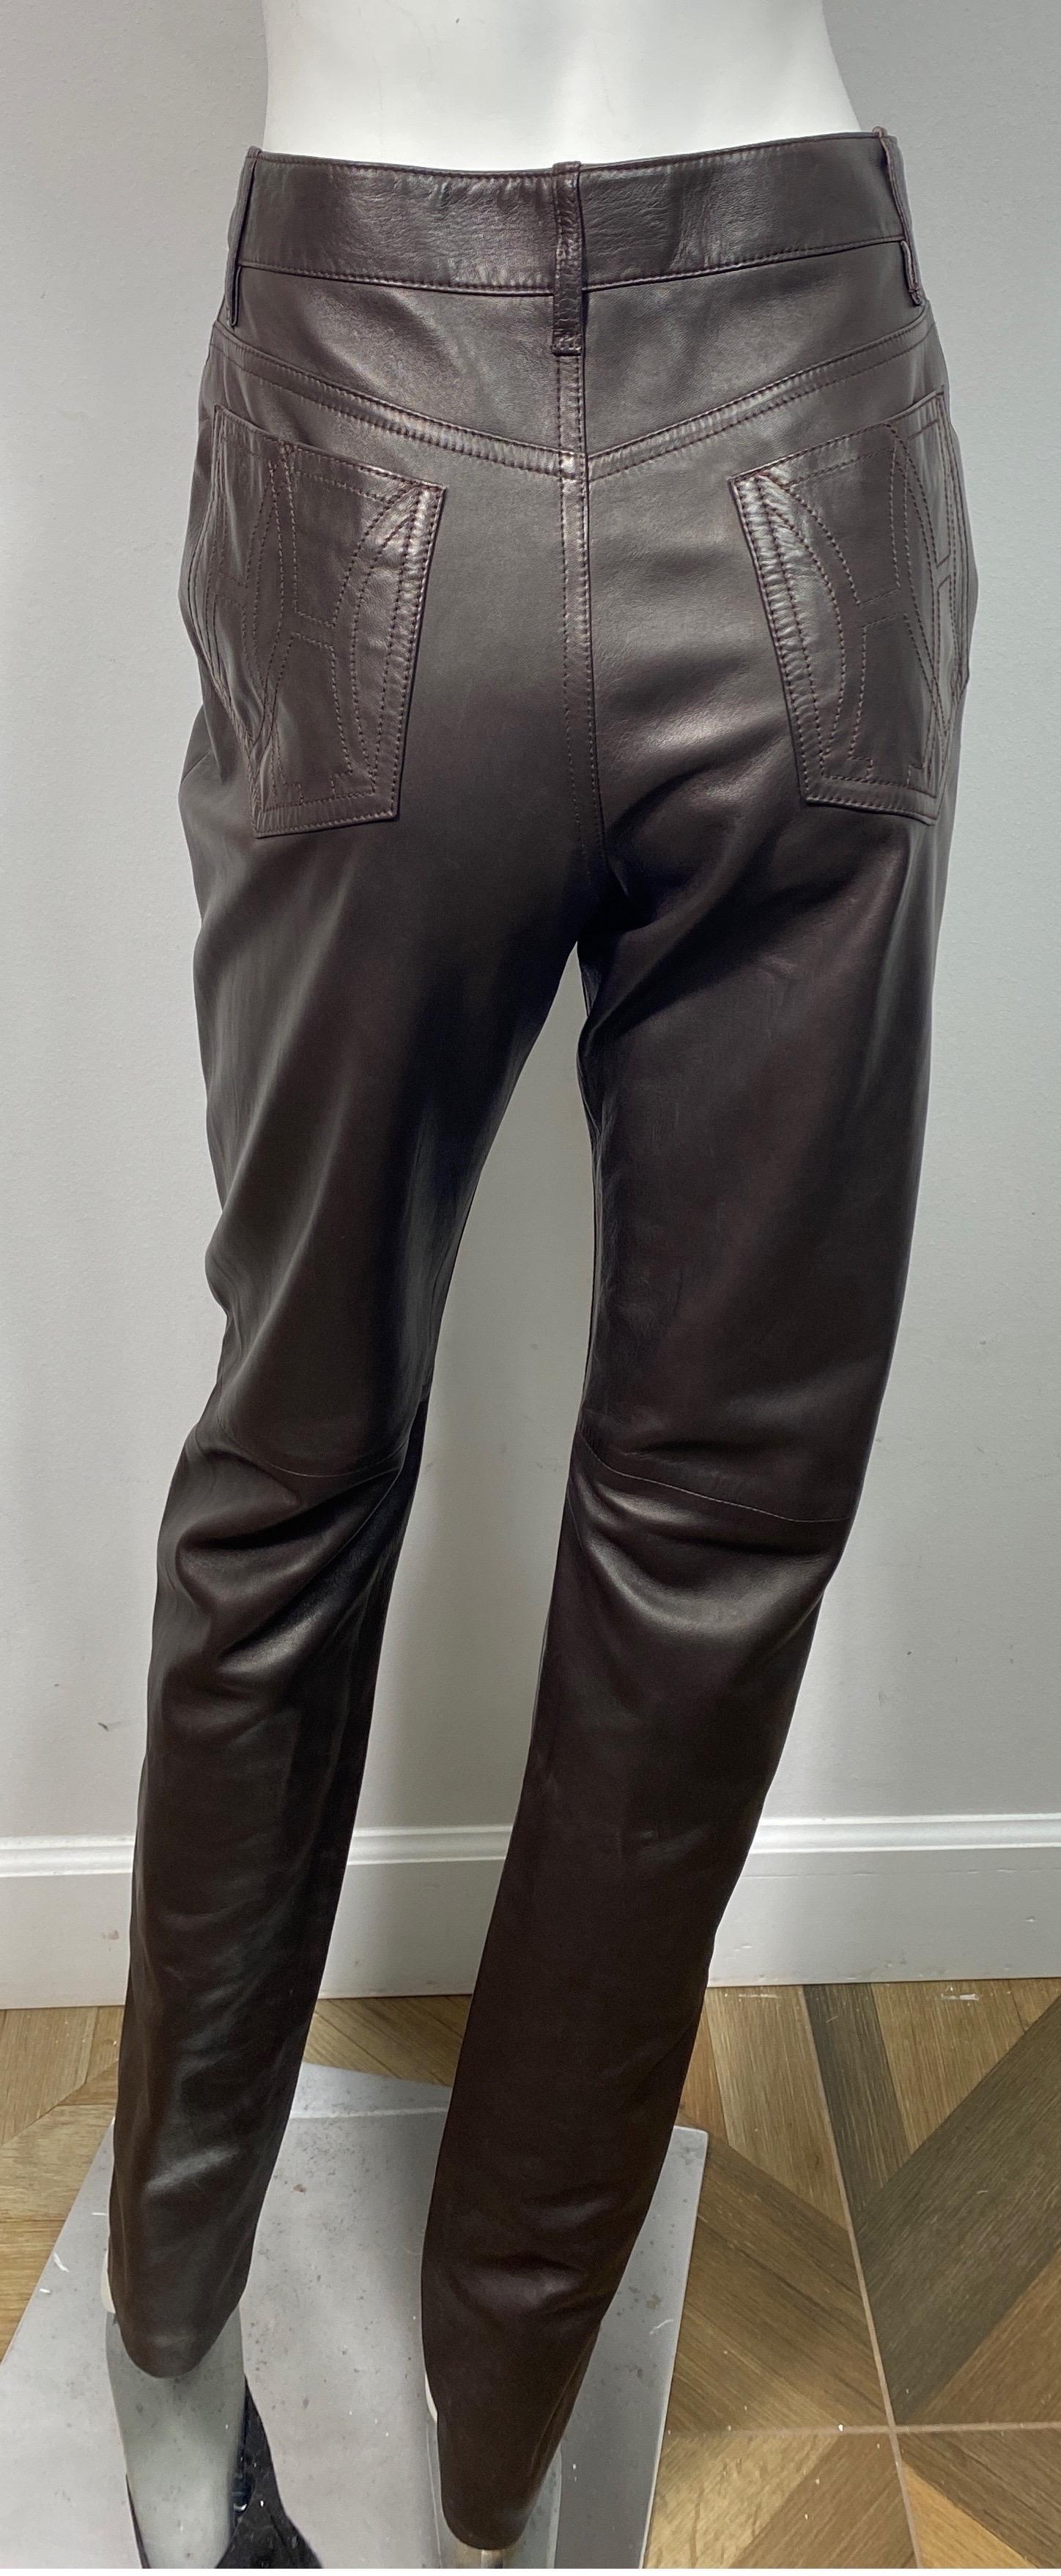 Hermes 1990’s Vintage Chocolate Brown Jean Style Leather Pants - Size 42 For Sale 7